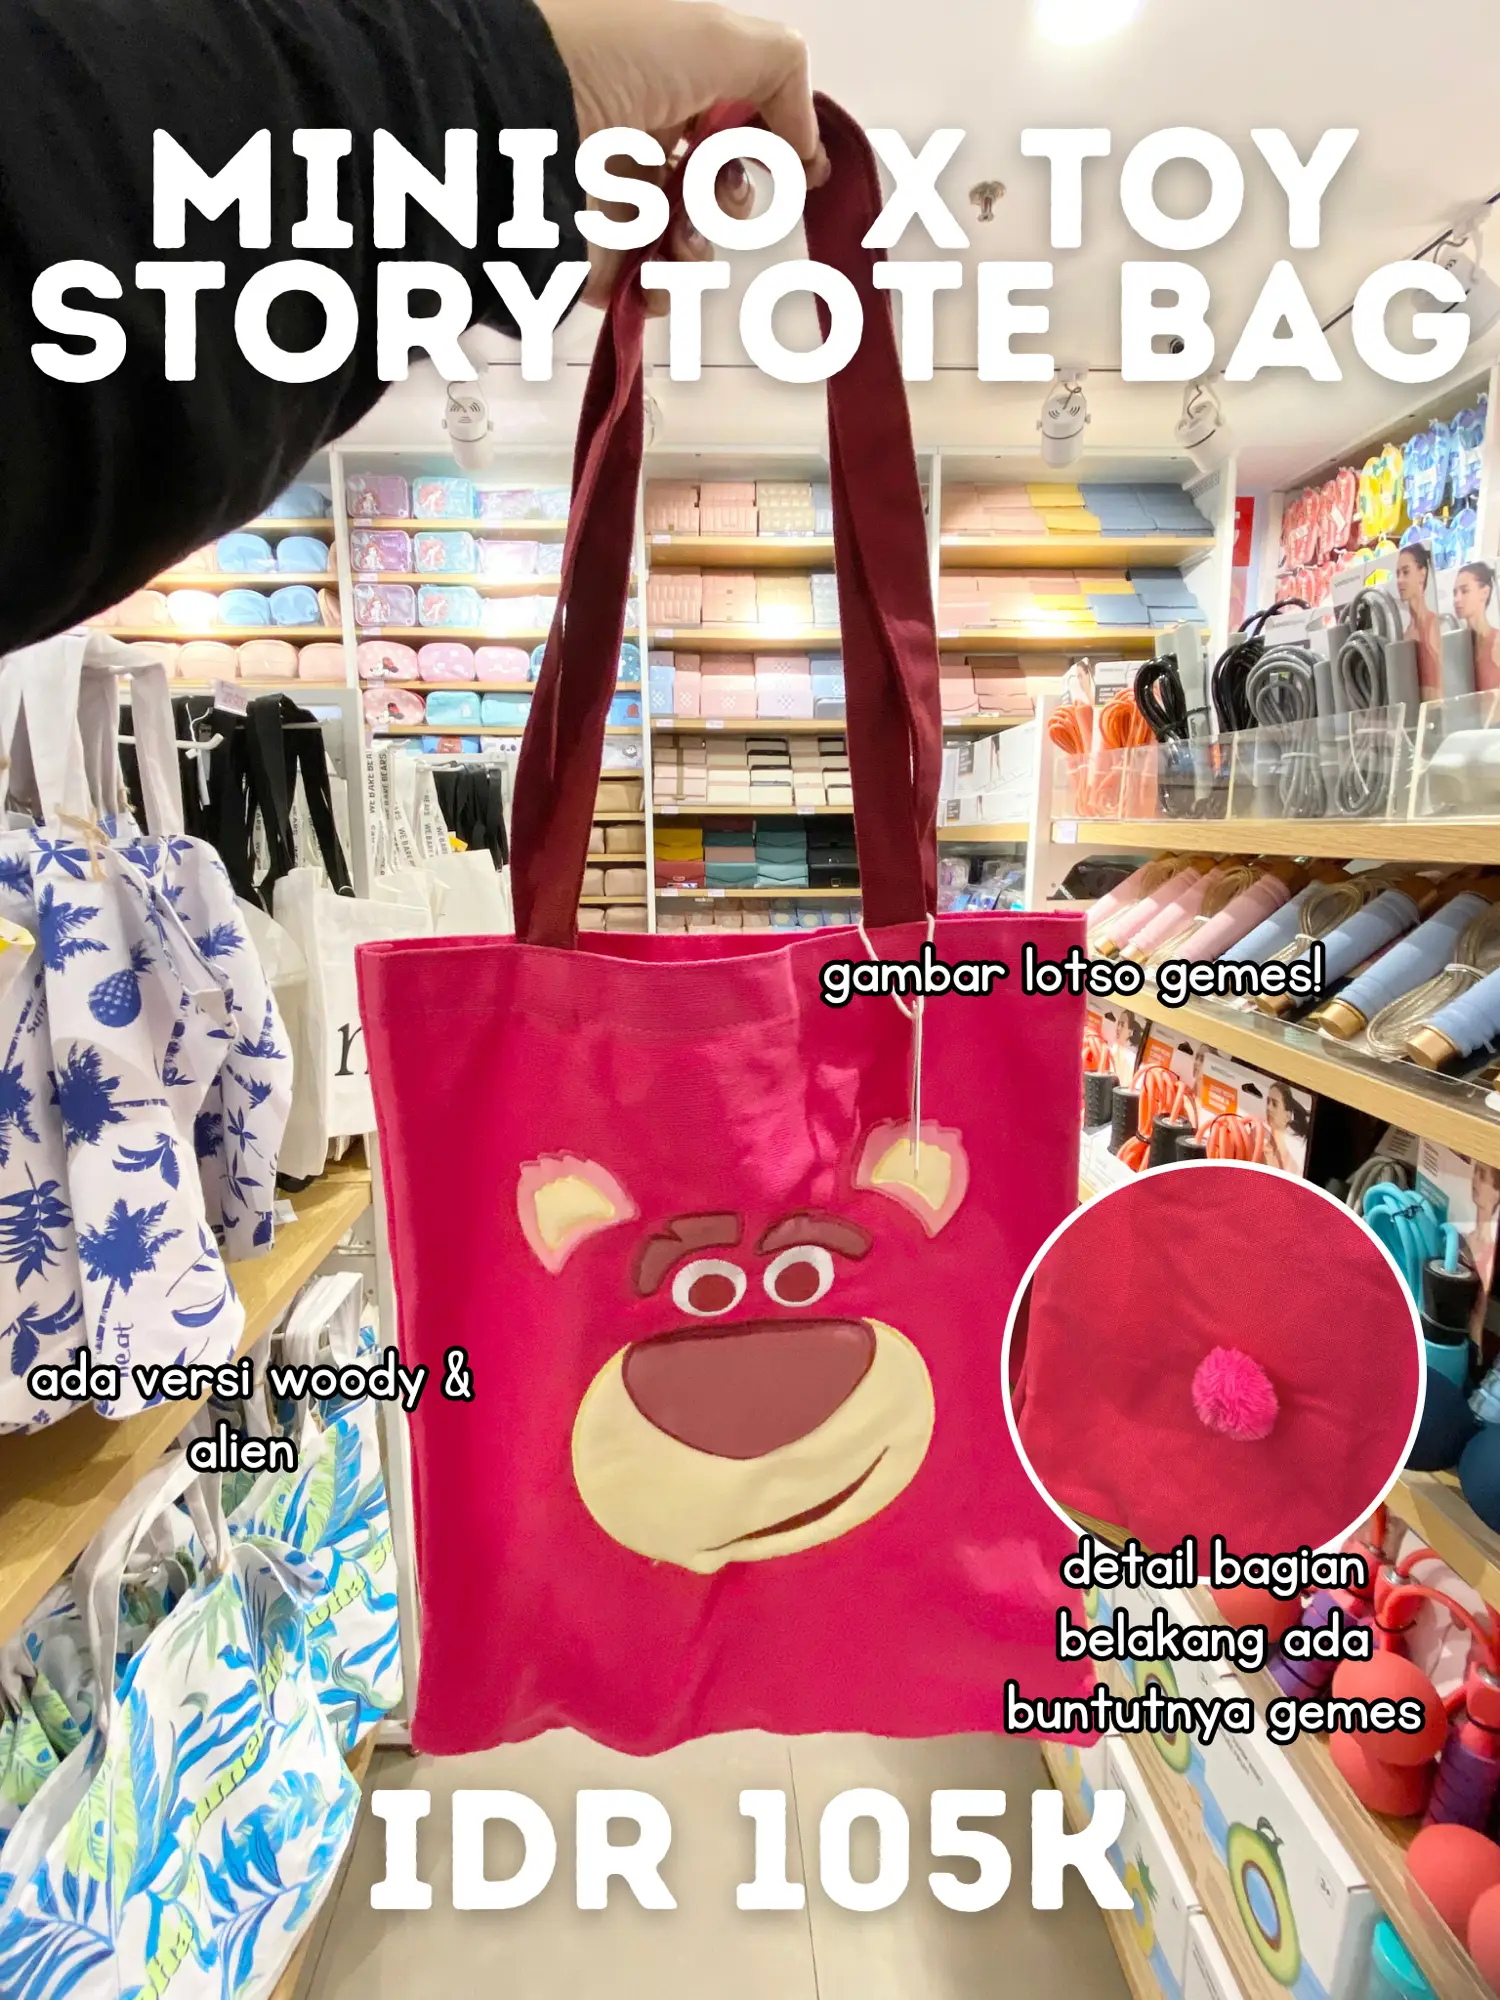 Miniso Indonesia - Never say never for using Miniso Marvel tote bag that  suits you very well with any outfit. #minisoindo #minisoindonesia  #lovelifeloveminiso #miniso #minisolife